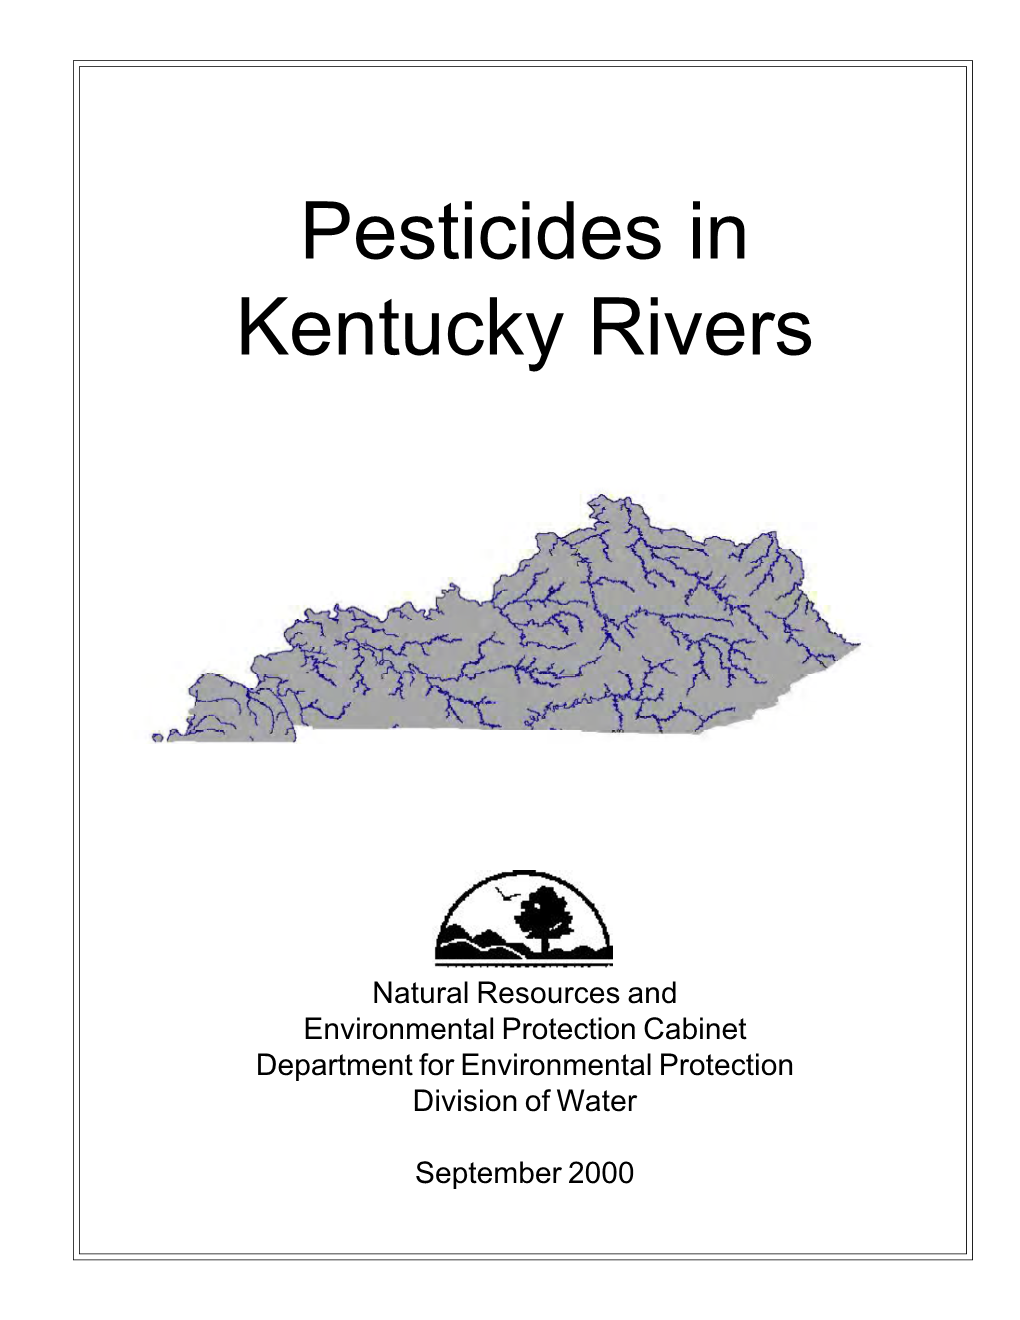 Pesticides in Kentucky Rivers